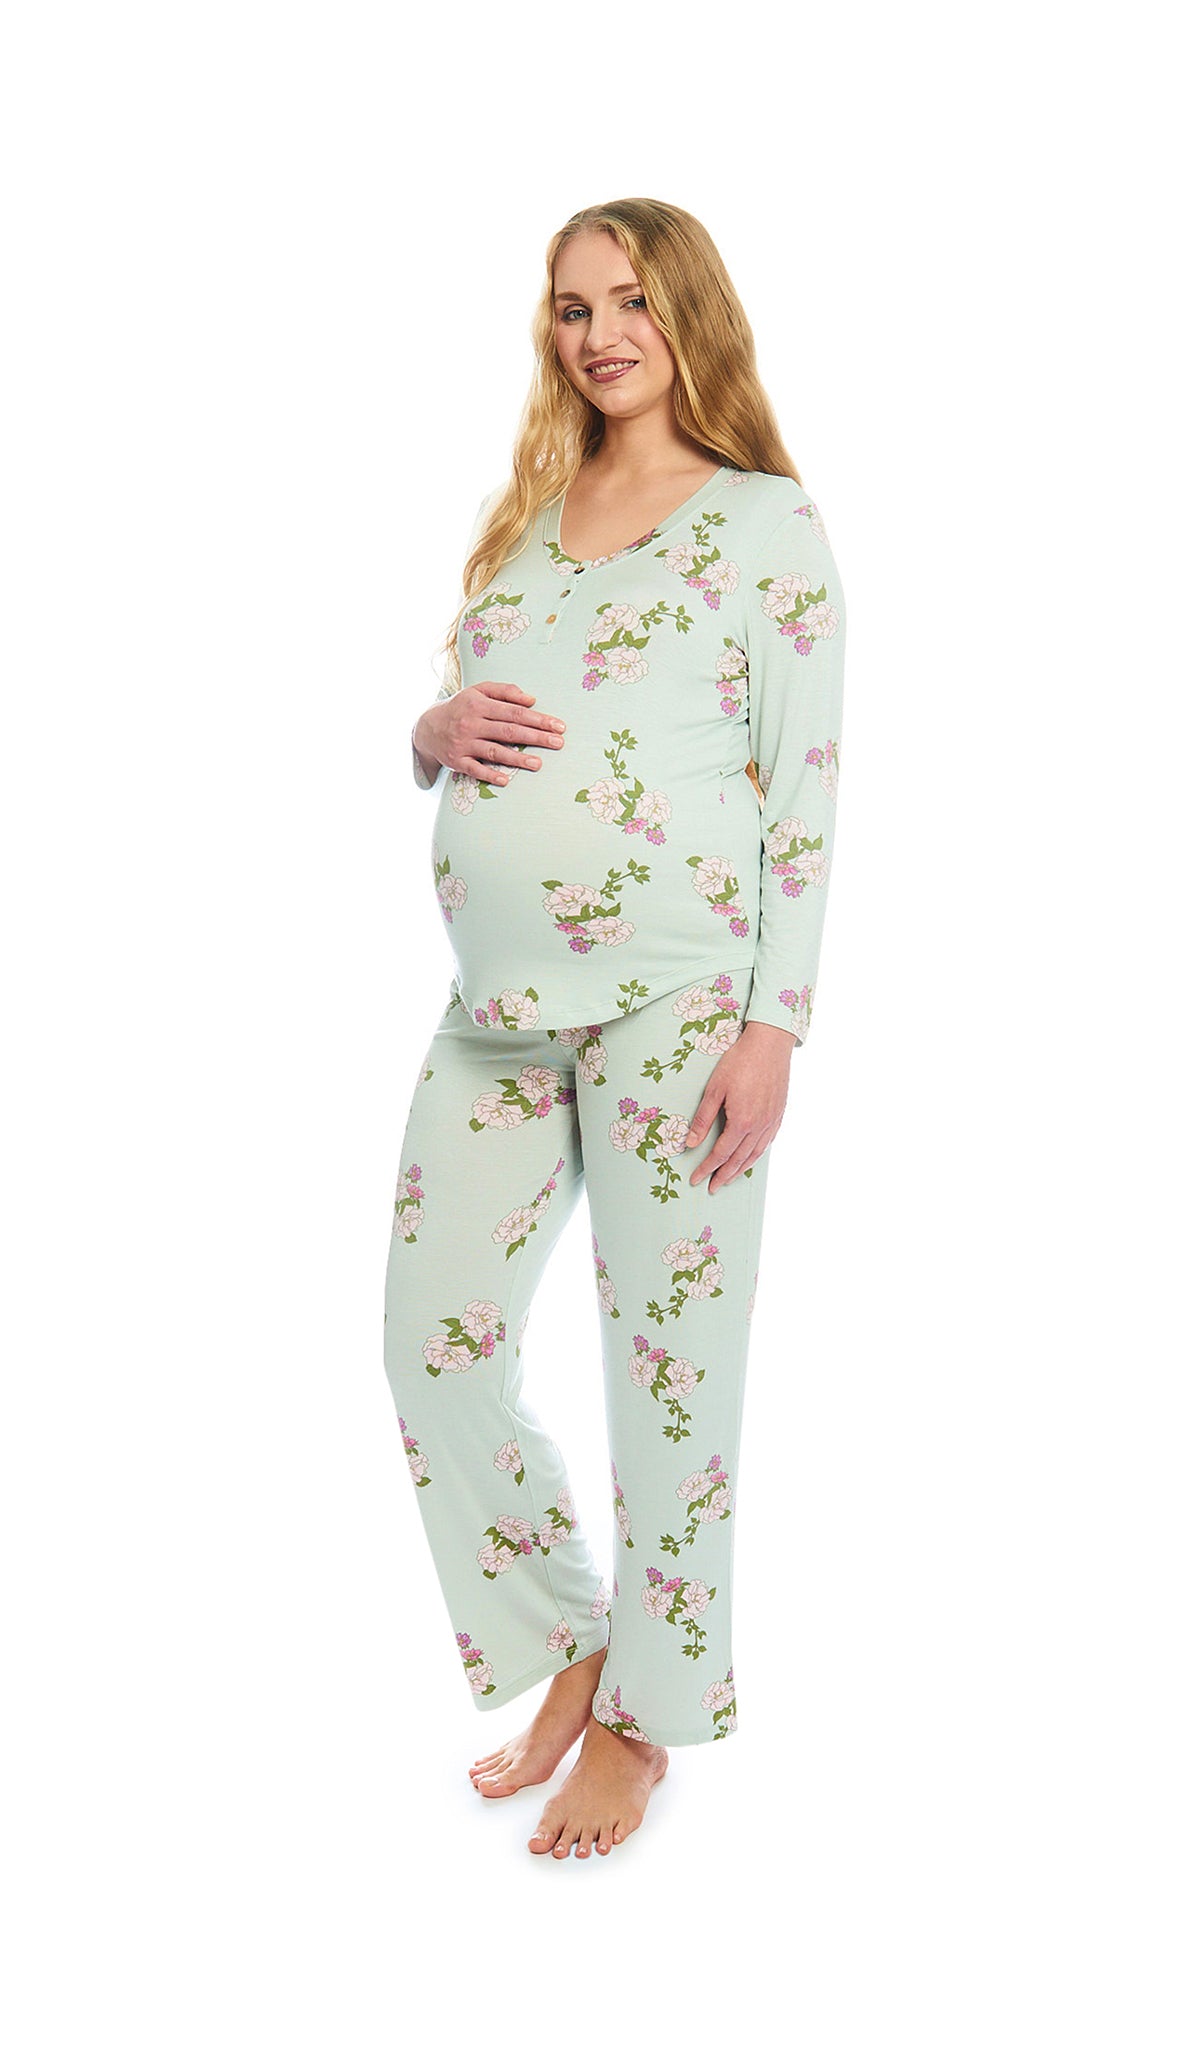 Peony Laina 2-Piece Set. Pregnant woman wearing button front placket long sleeve top and pant with one hand on belly.